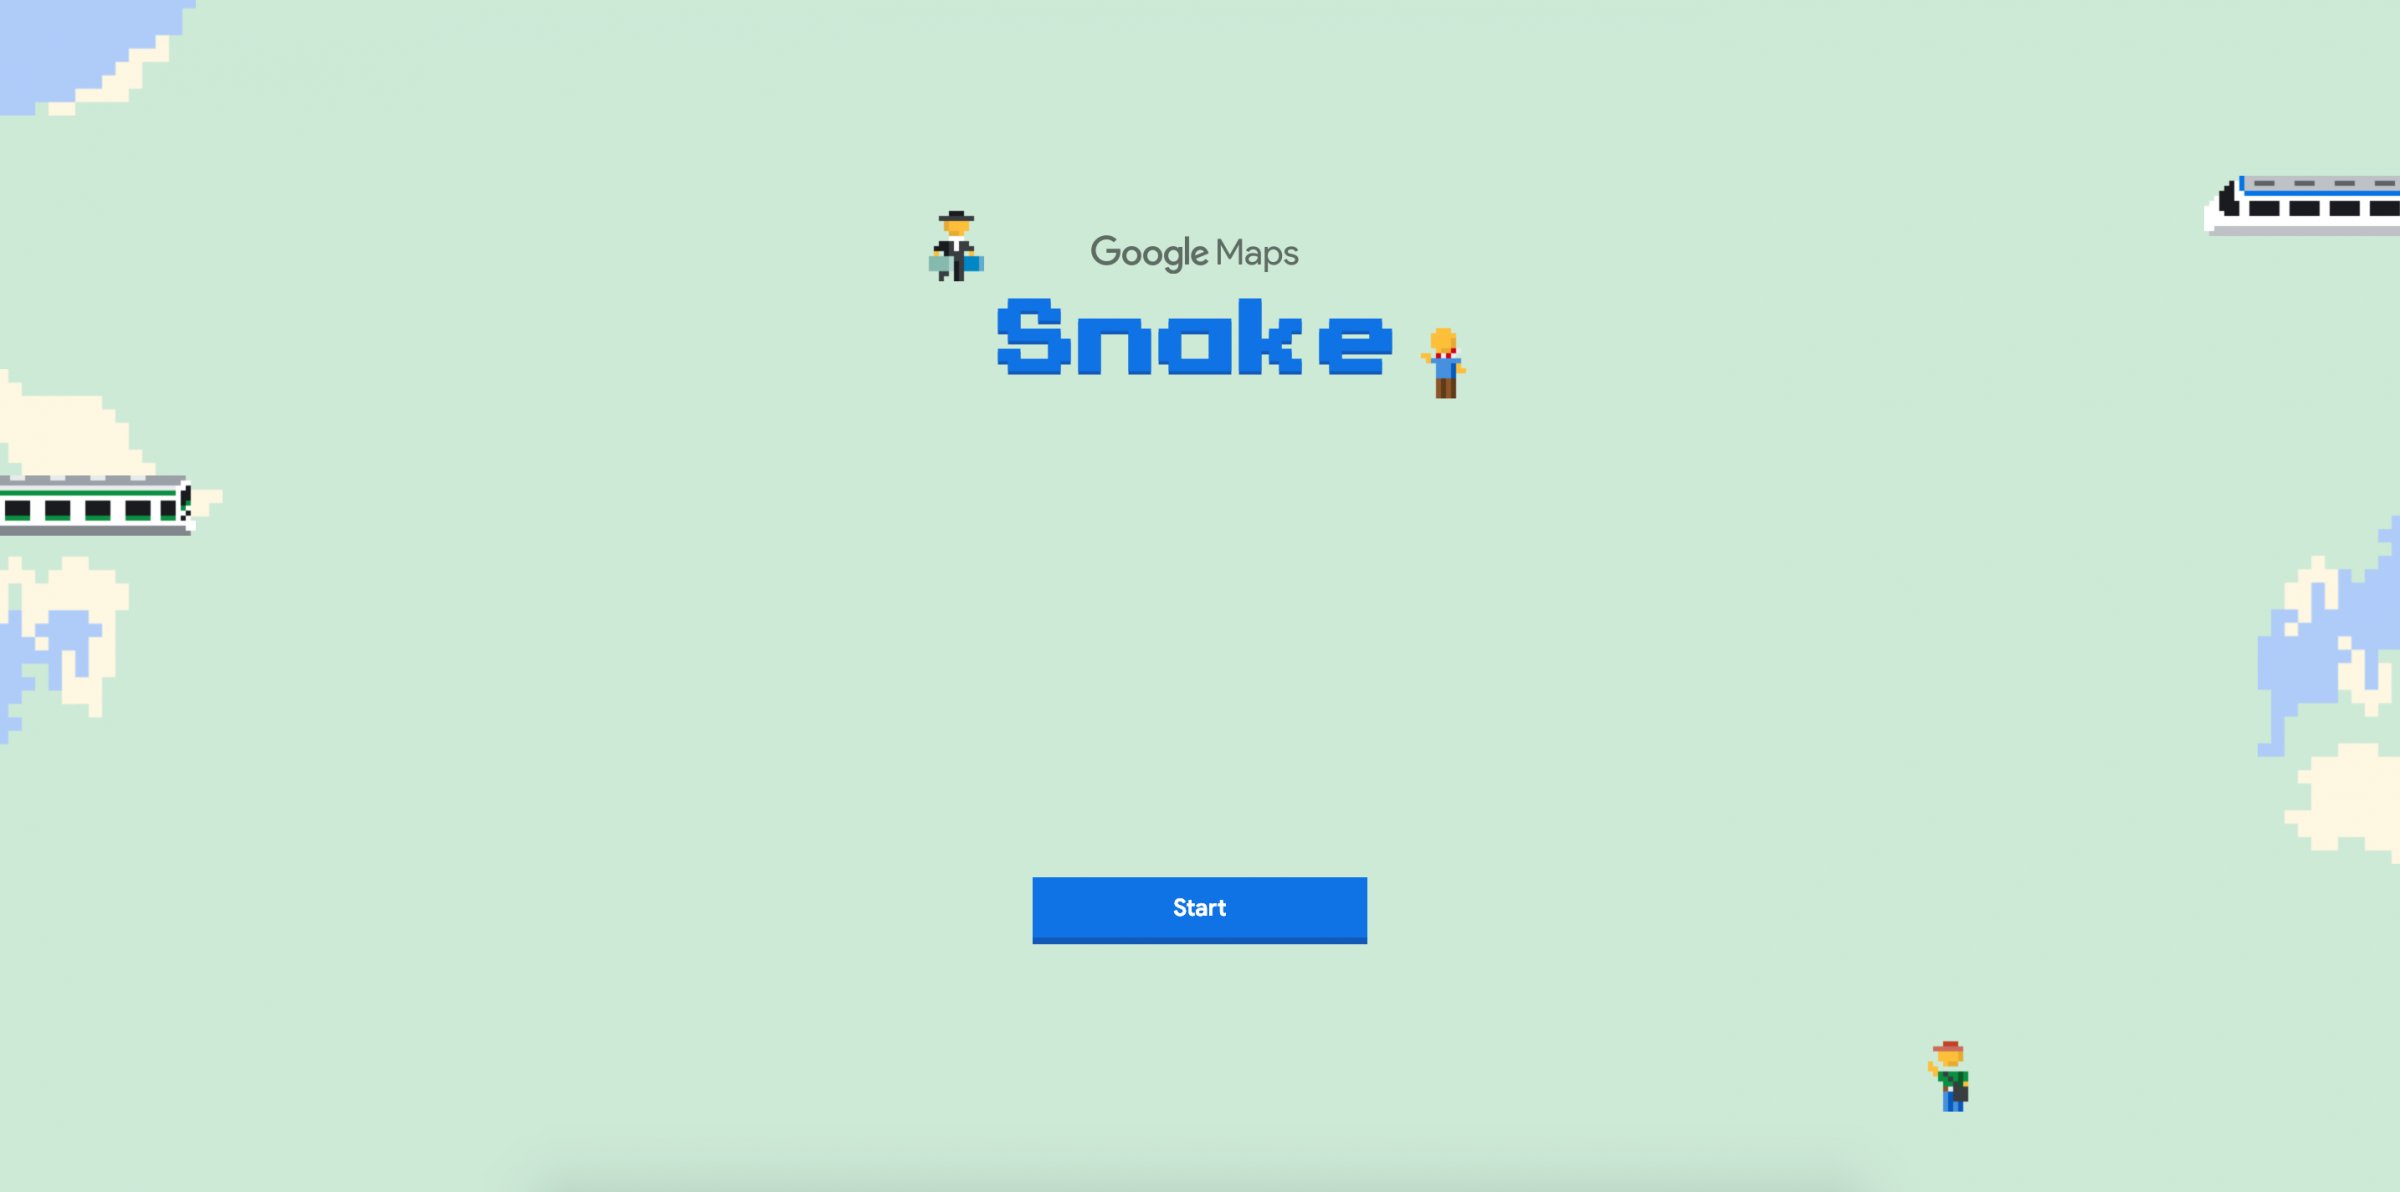 Google brings back the snakes game to your phone as a part of